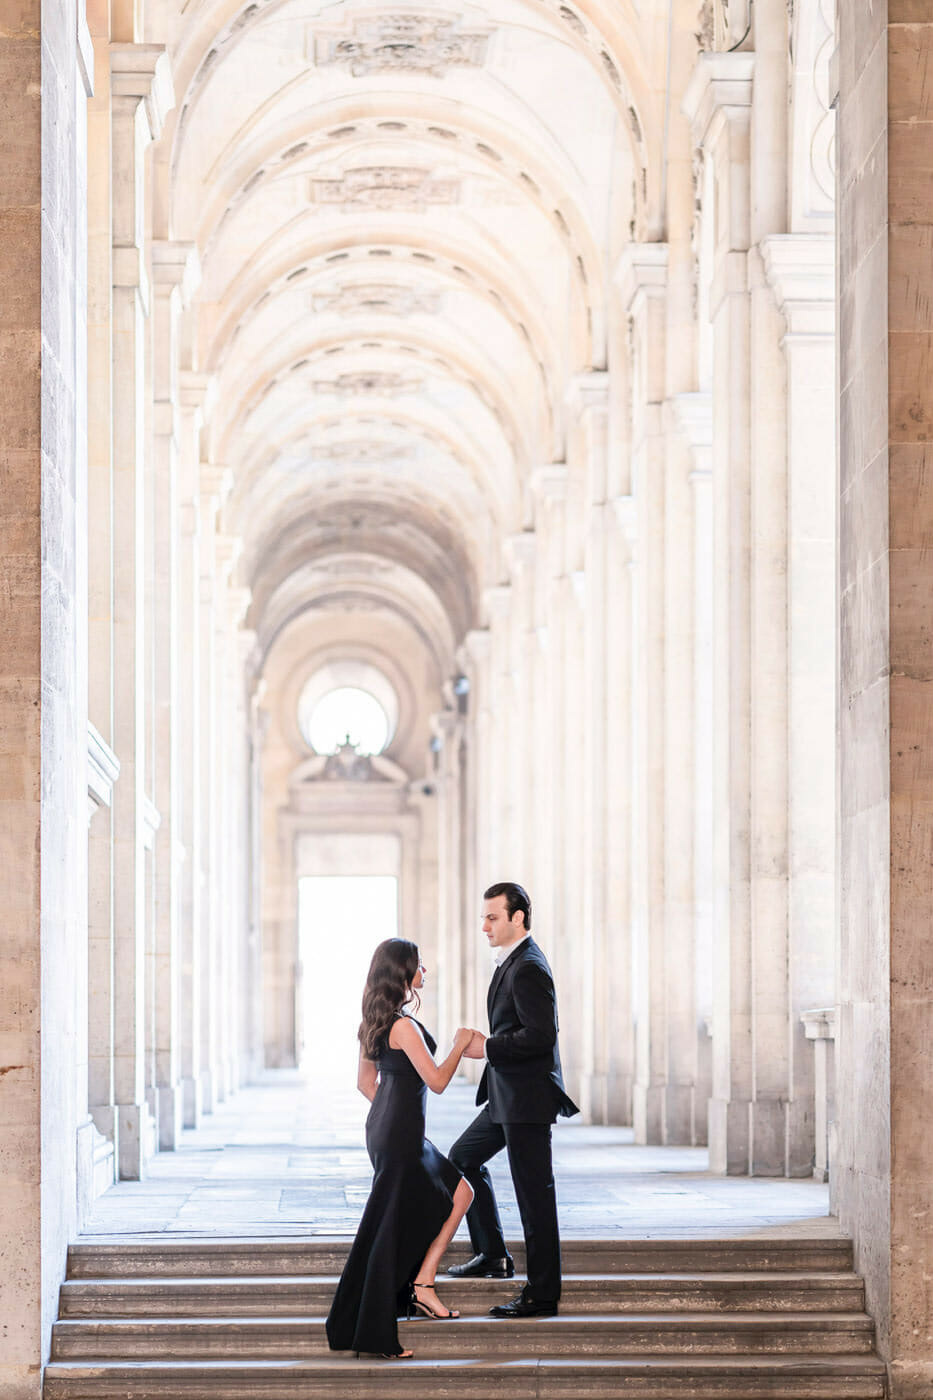 Paris couple photography at the Louvre Museum during sunrise